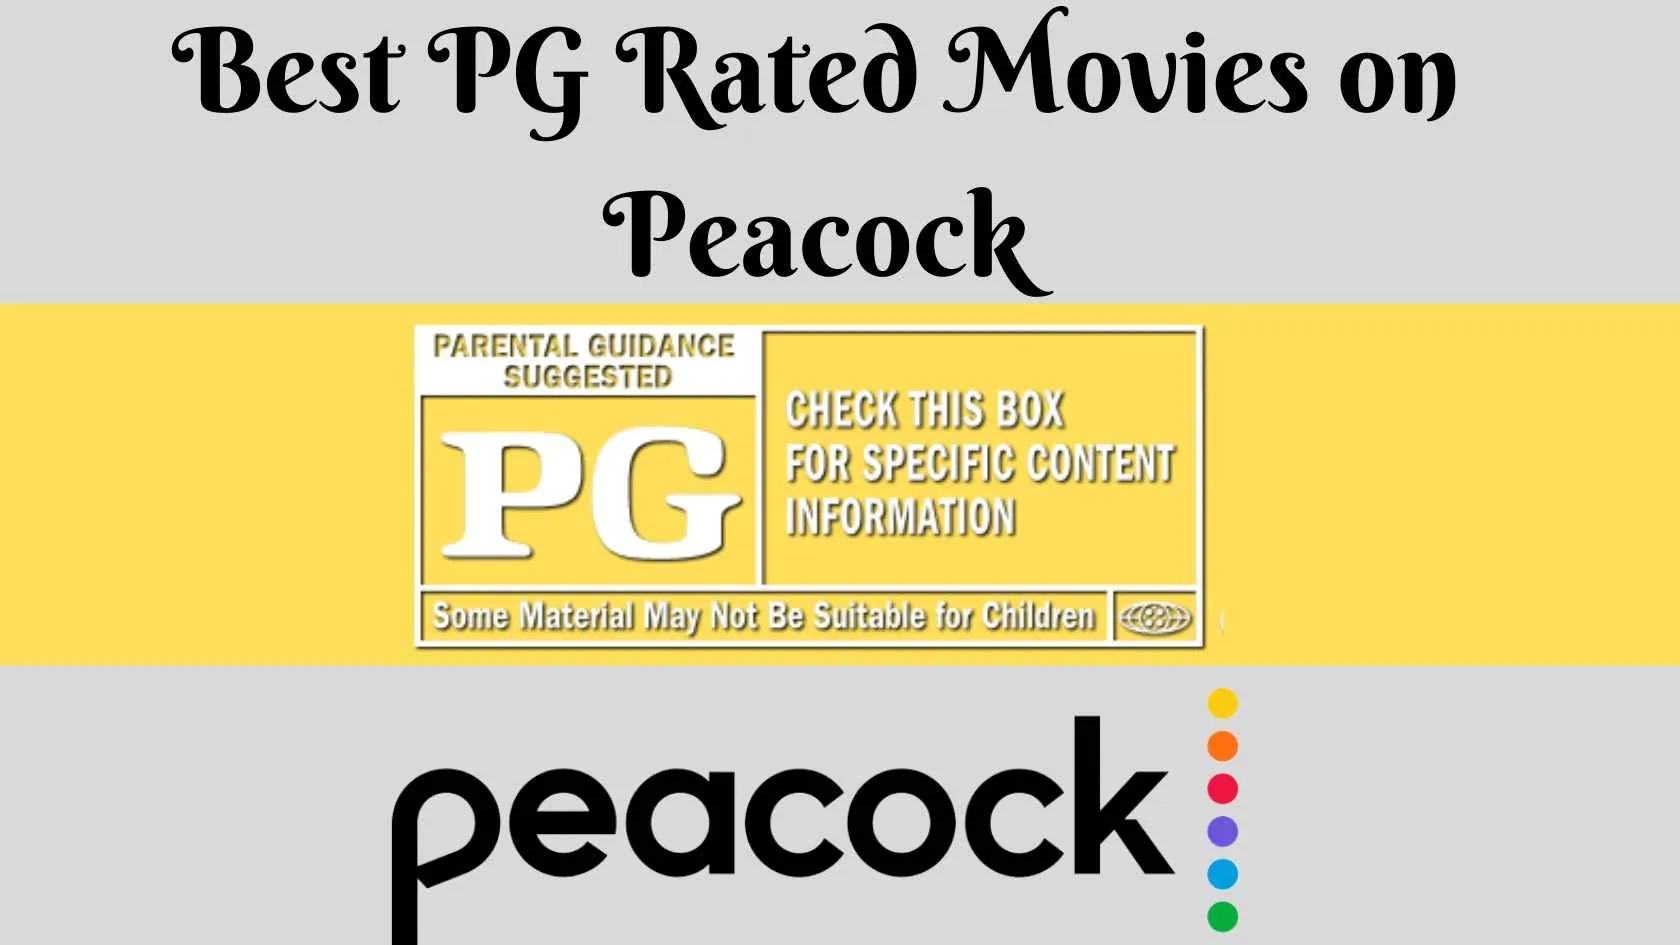 Best PG Rated Movies on Peacock